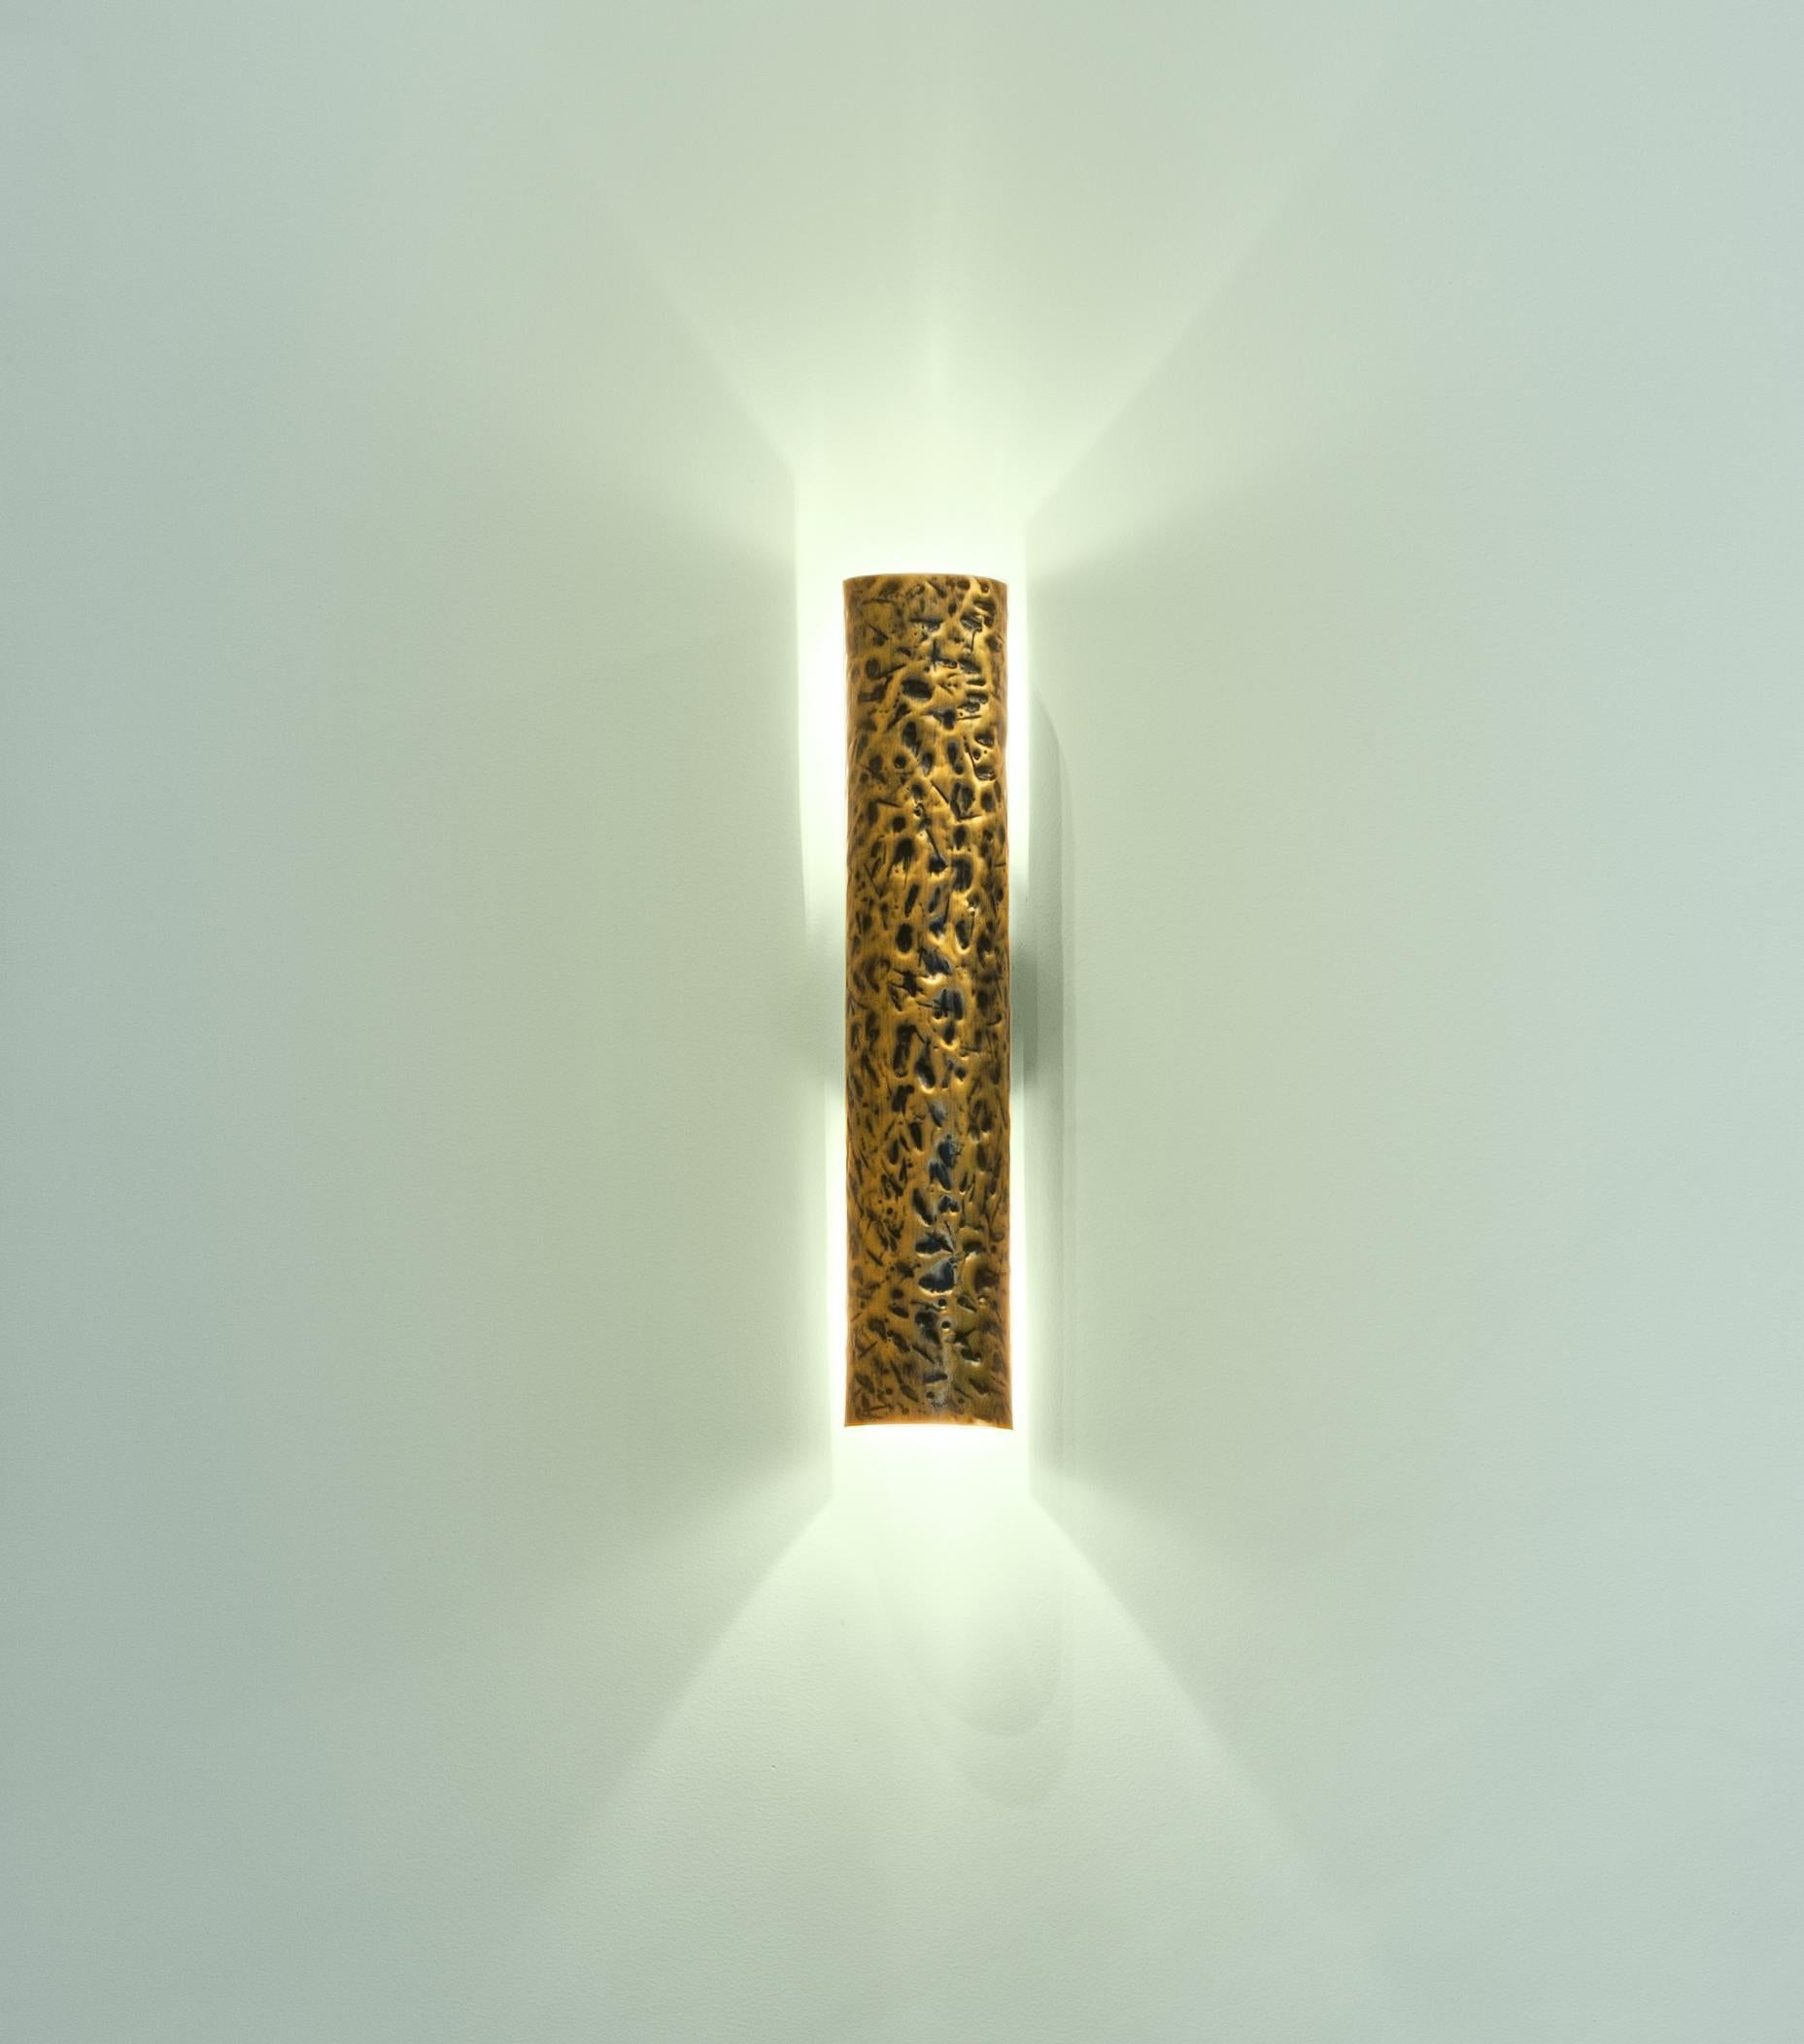 Modern Tree Branches Wall Lamp, Hammered Copper, InsidherLand by Joana Santos Barbosa For Sale